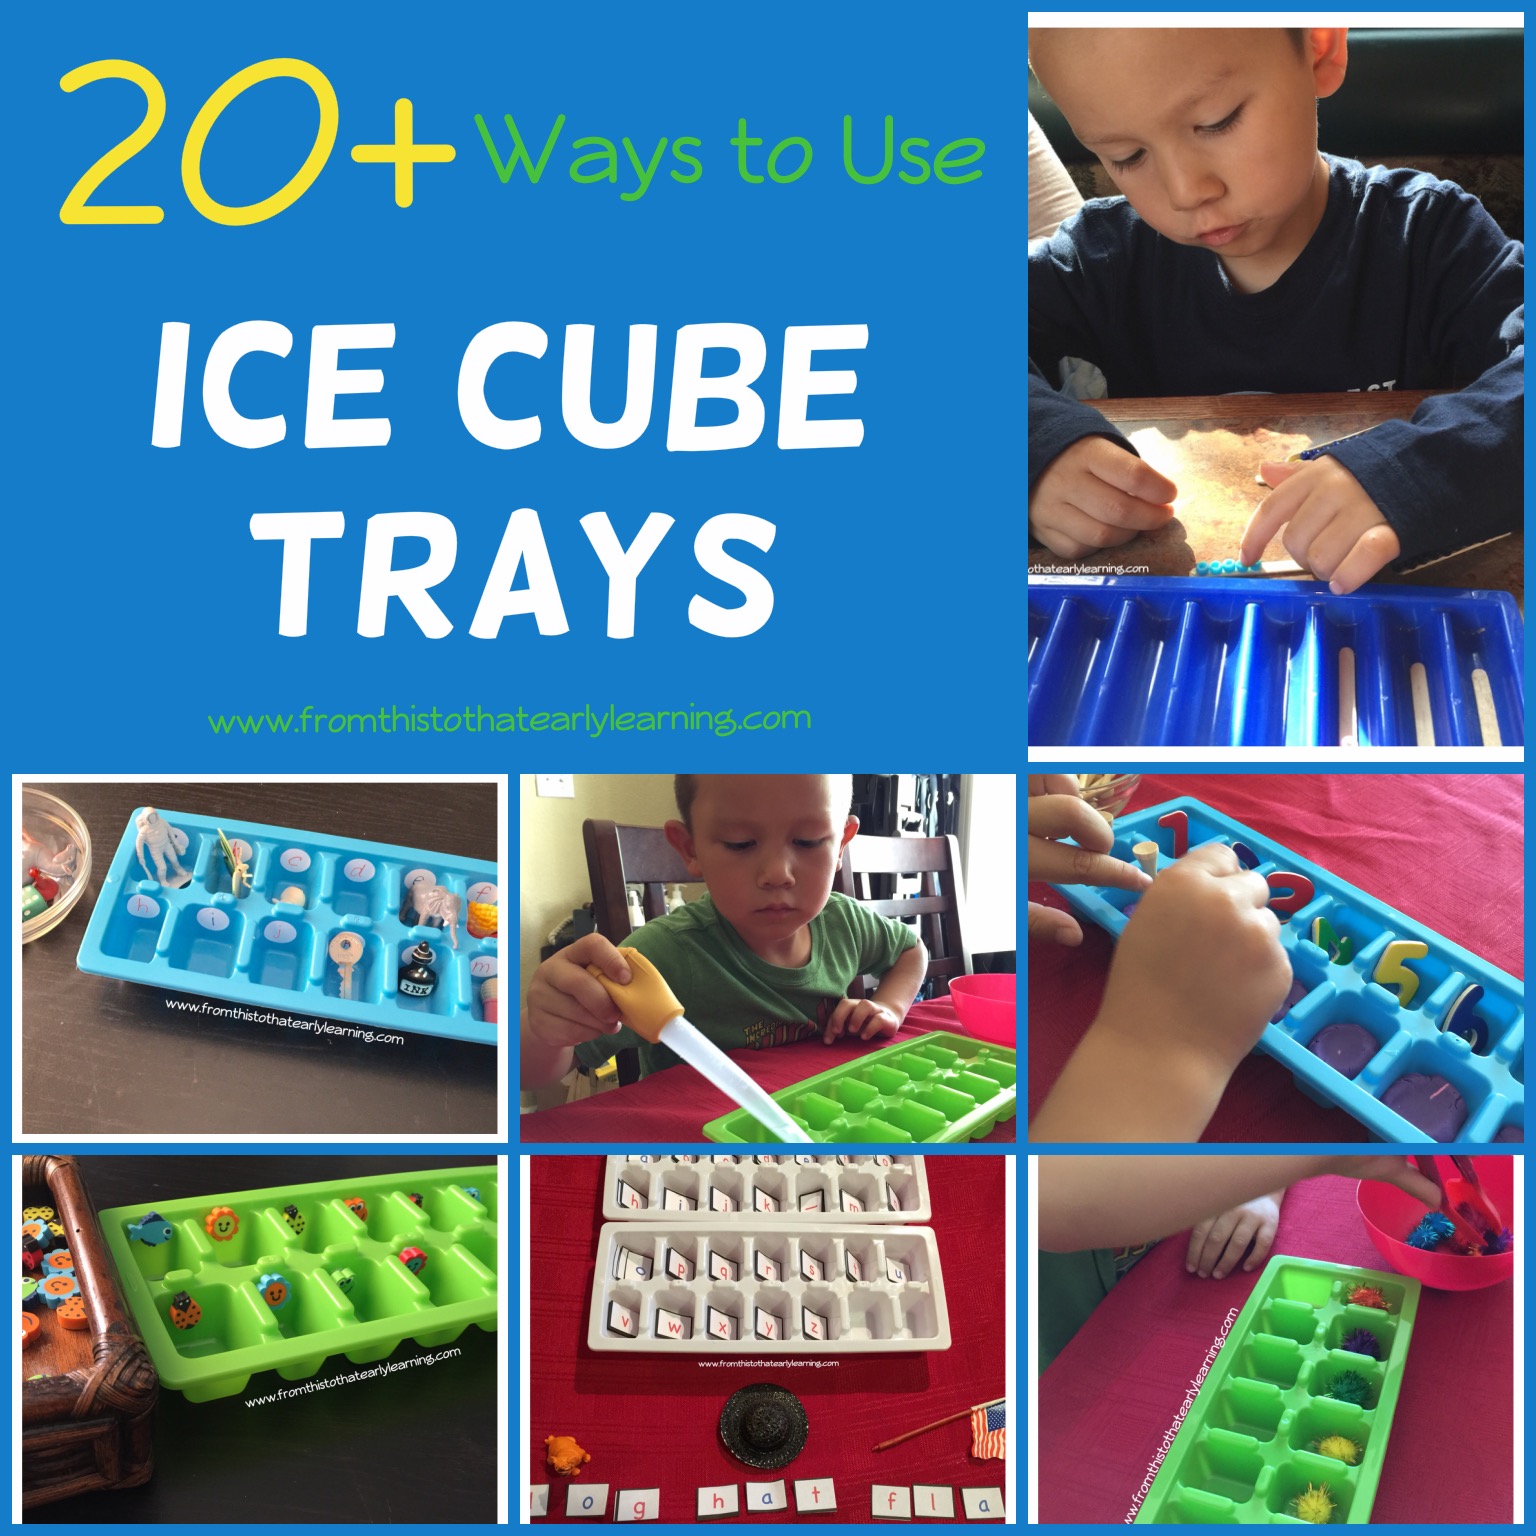 3 Reasons Not to use Ice Cube Trays – Mummy Cooks